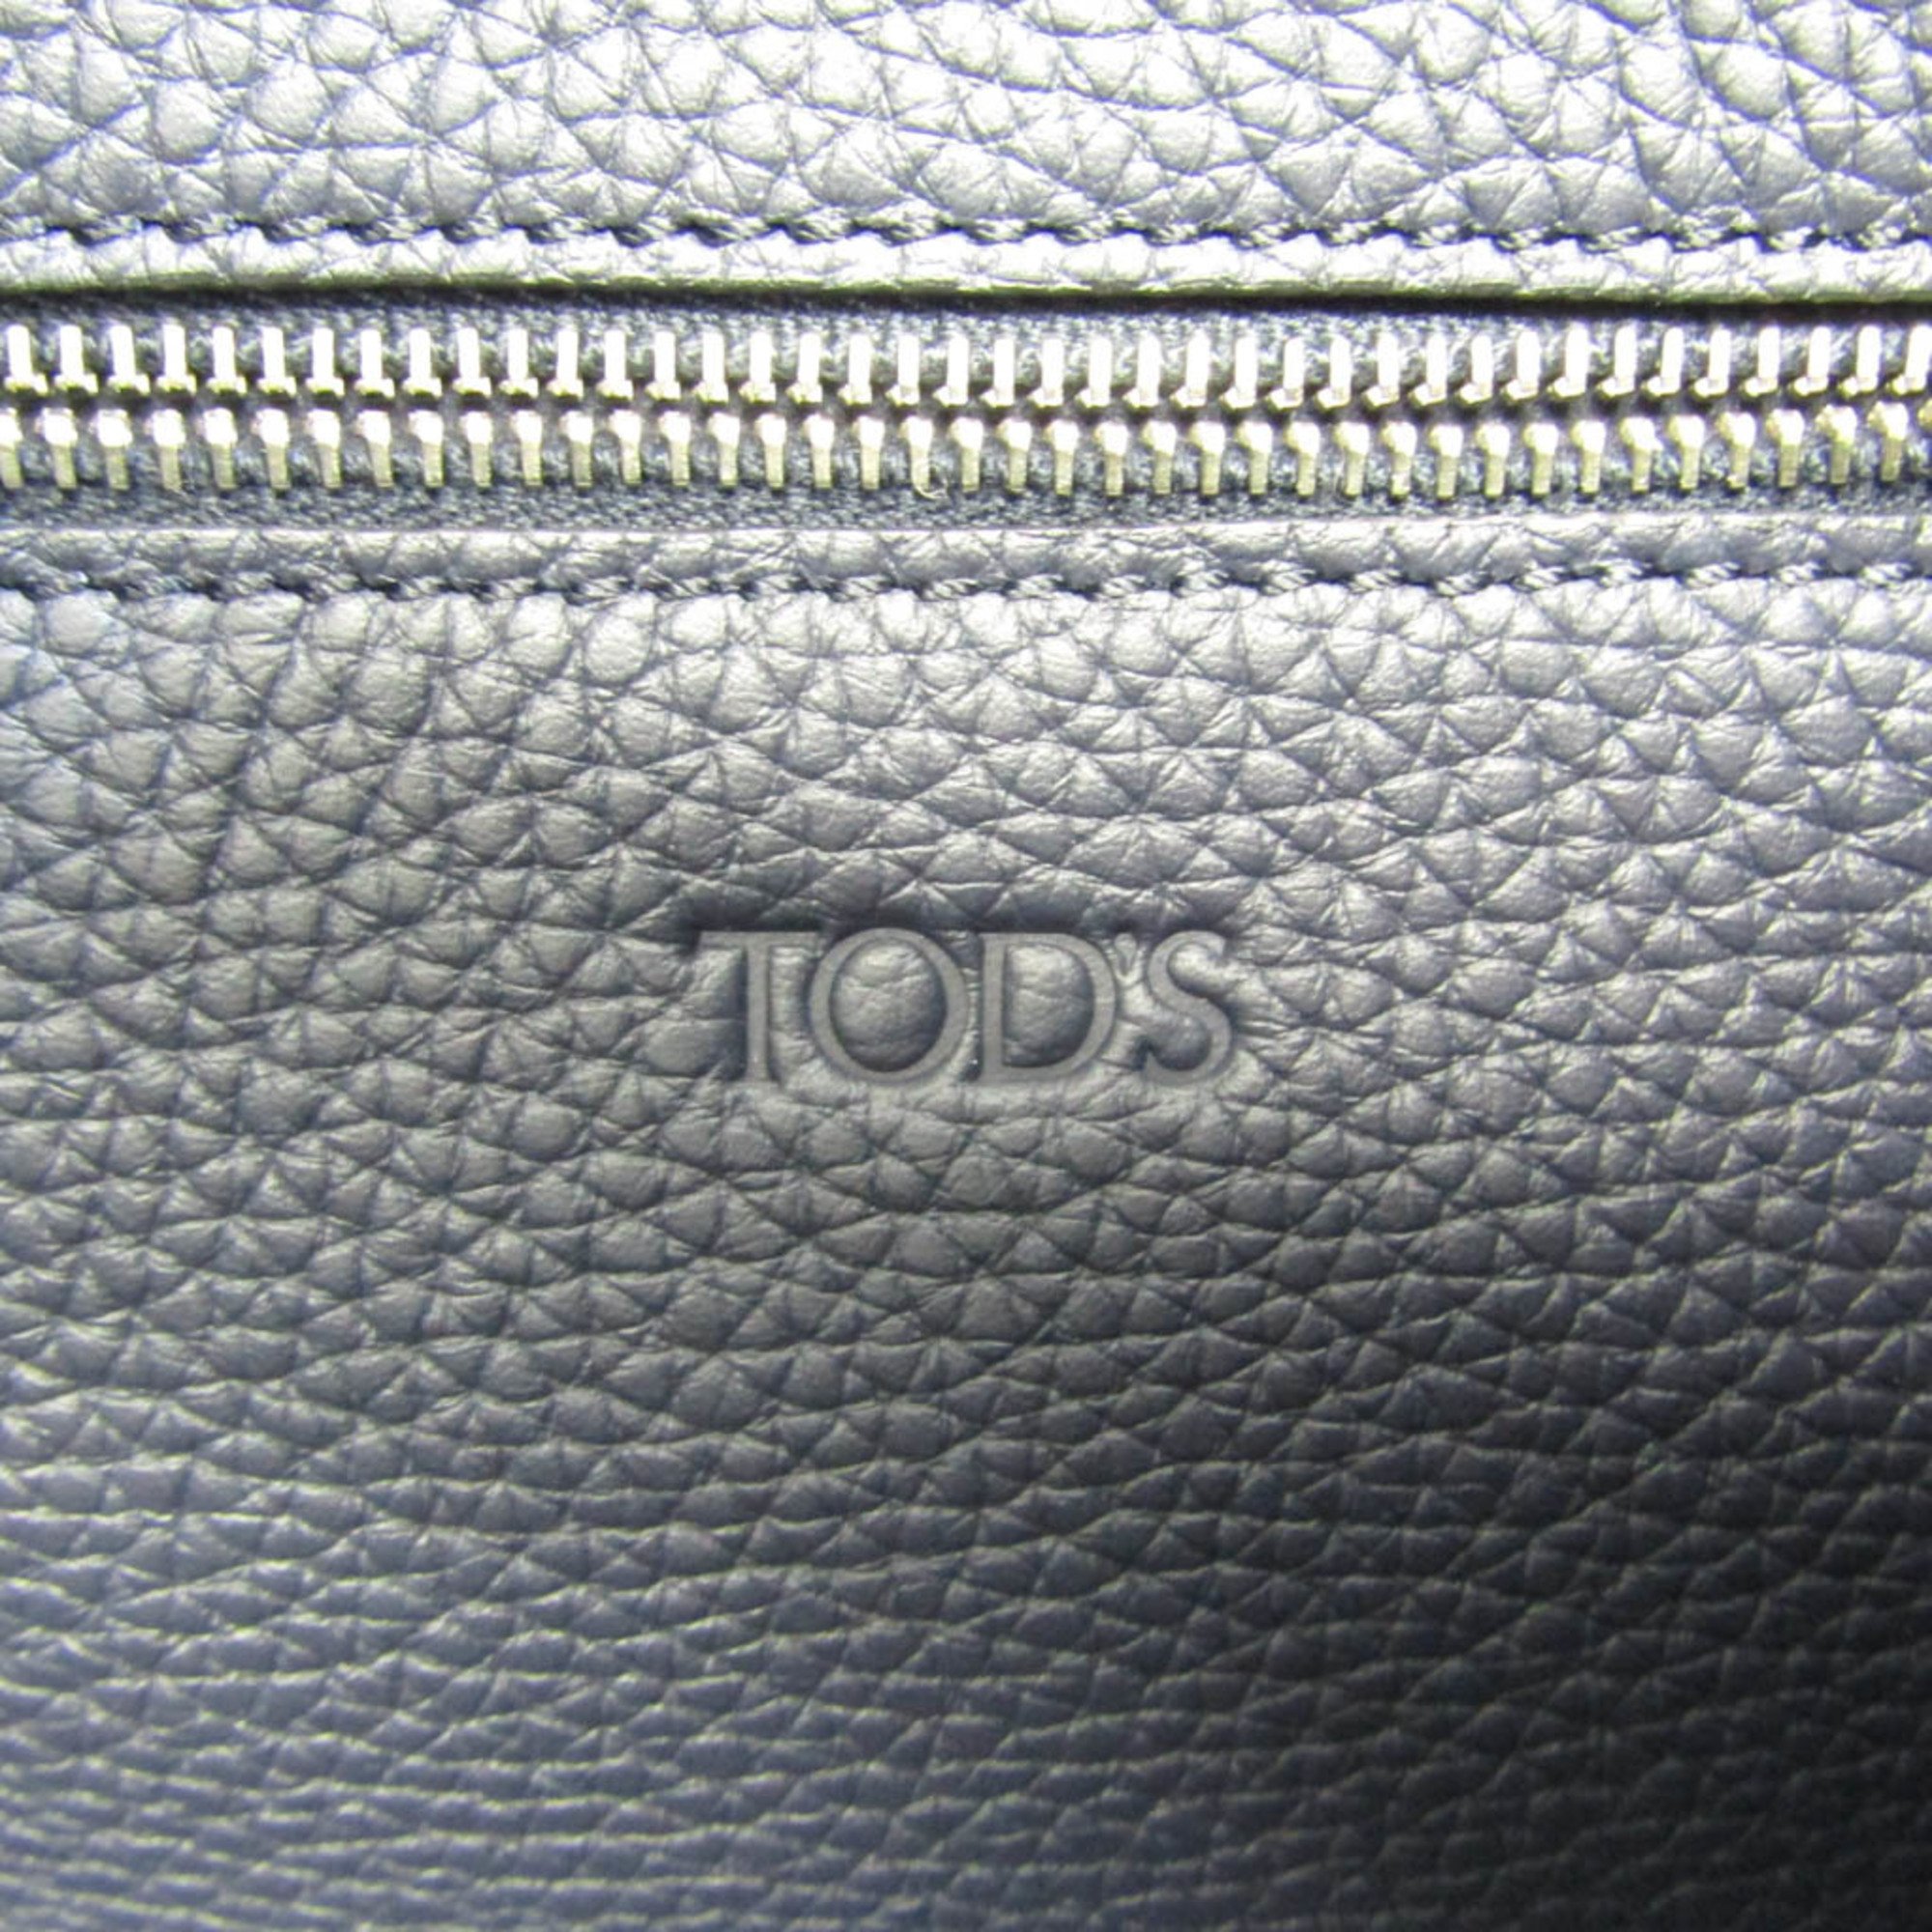 Tod's Women's Leather Tote Bag Navy